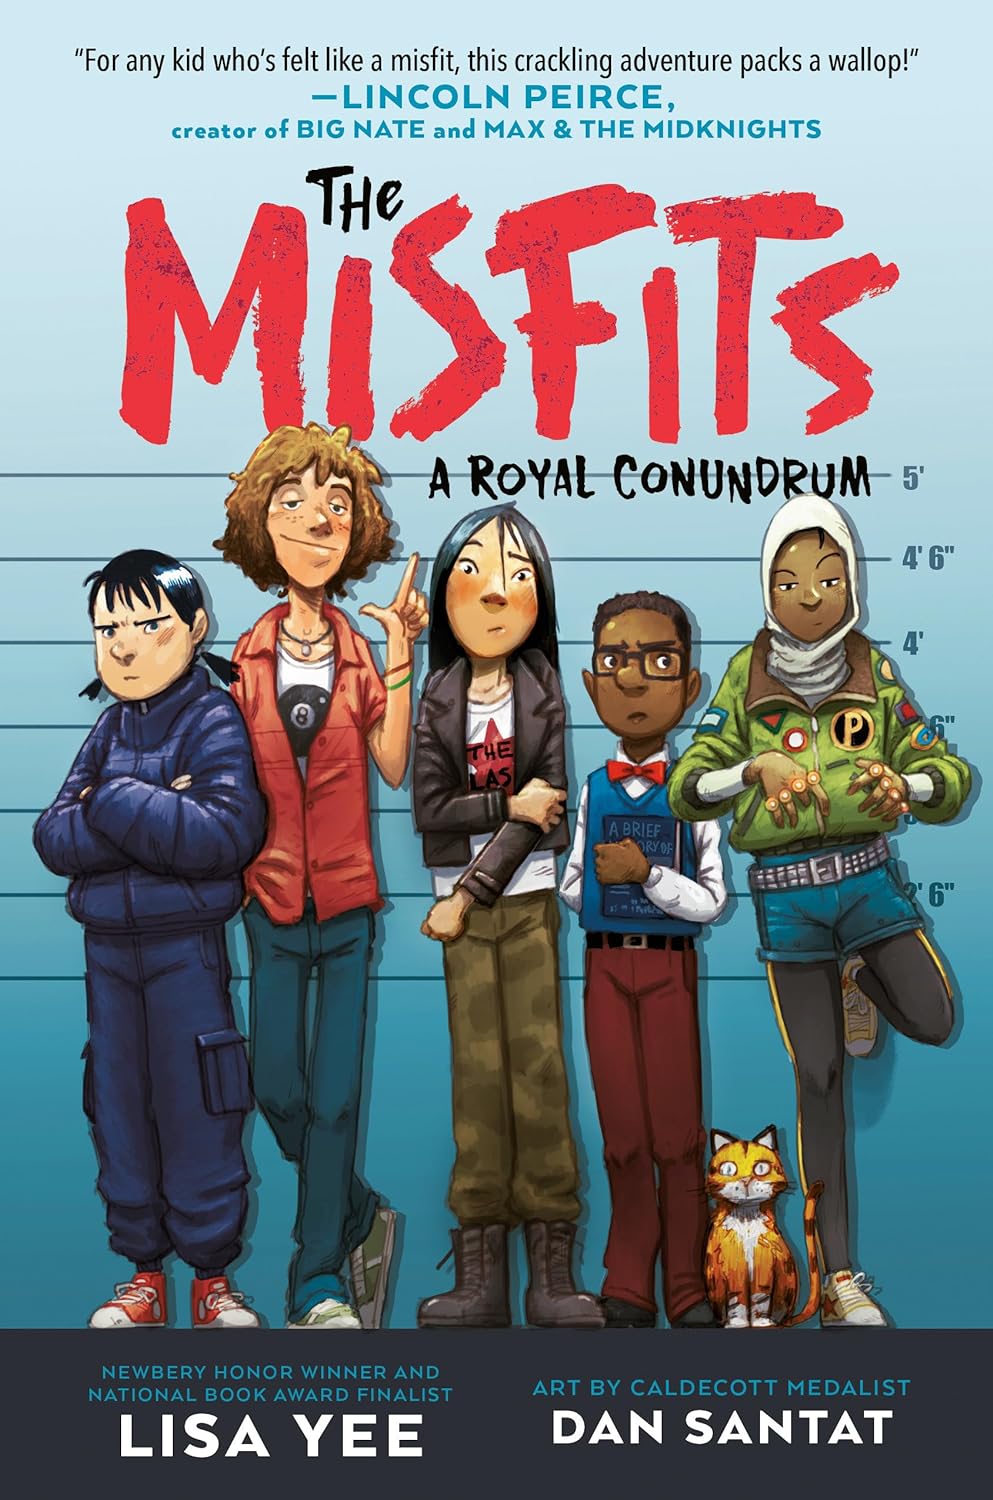 The Misfits #1: A Royal Conundrum by Lisa Yee